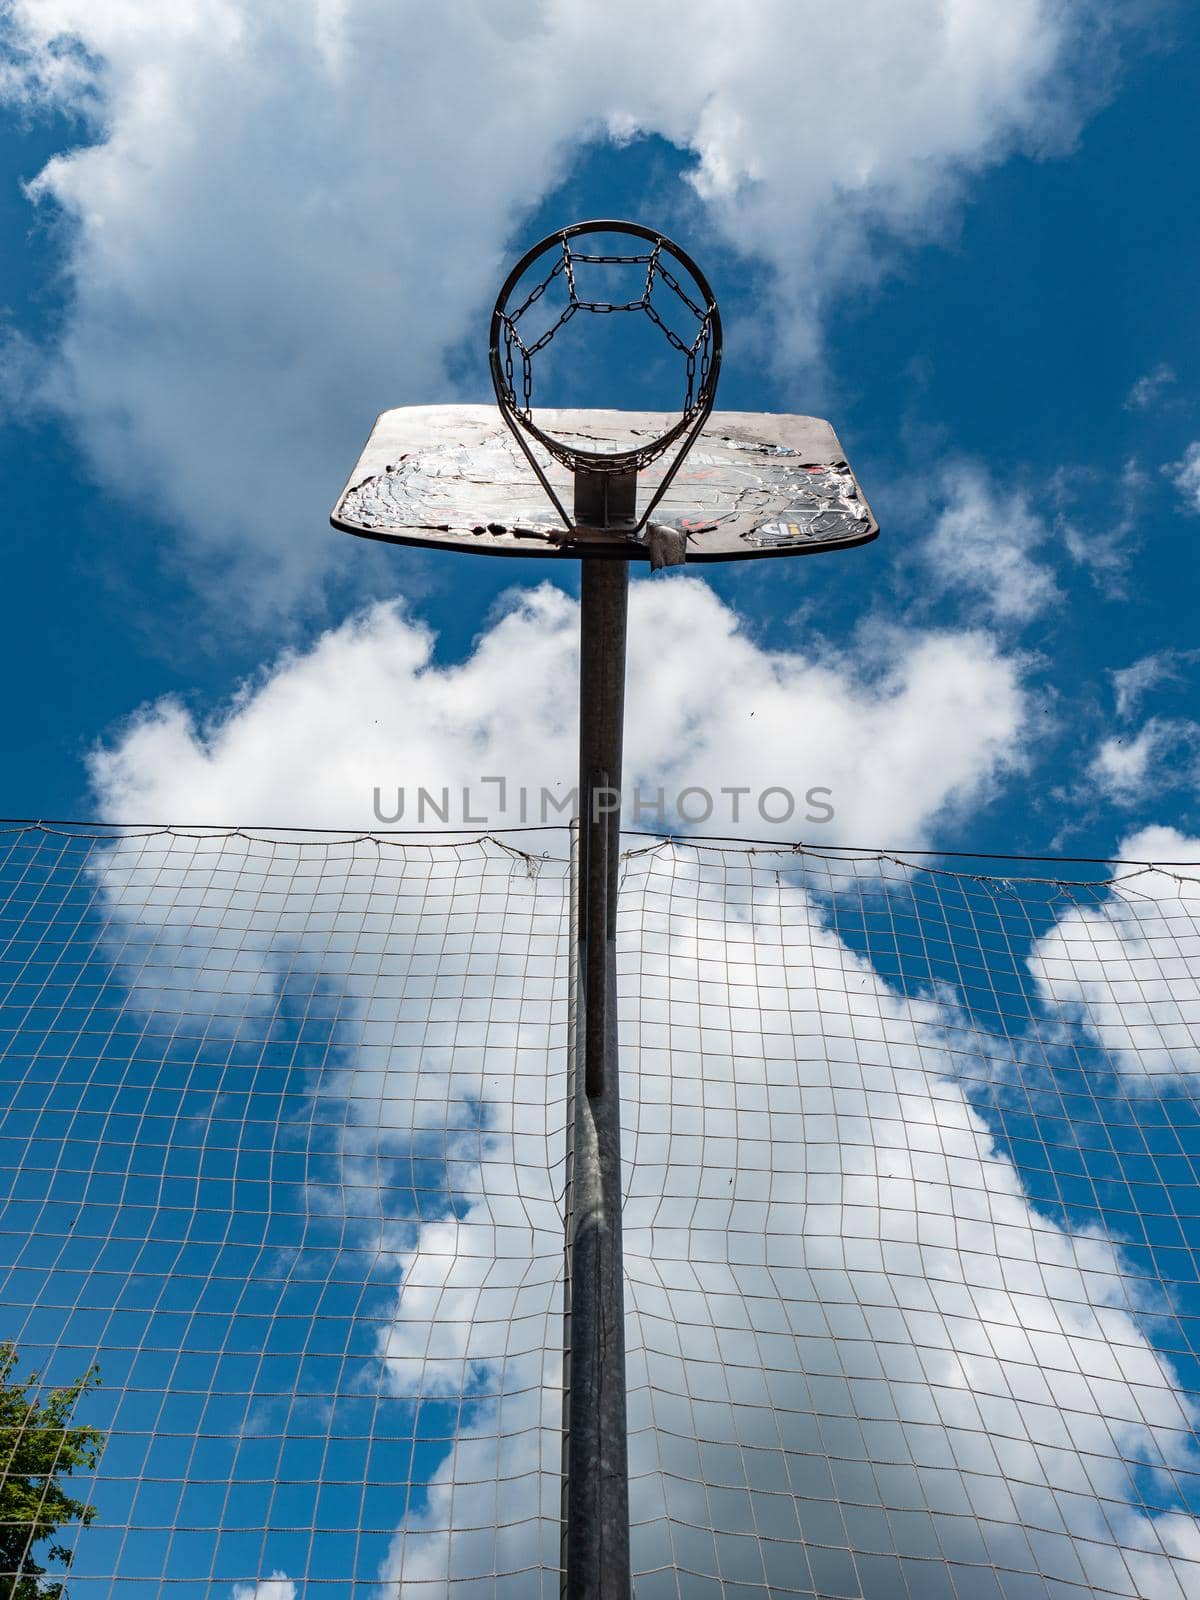 Basketball and a basket in an outdoor court with natural lightning. by rdonar2